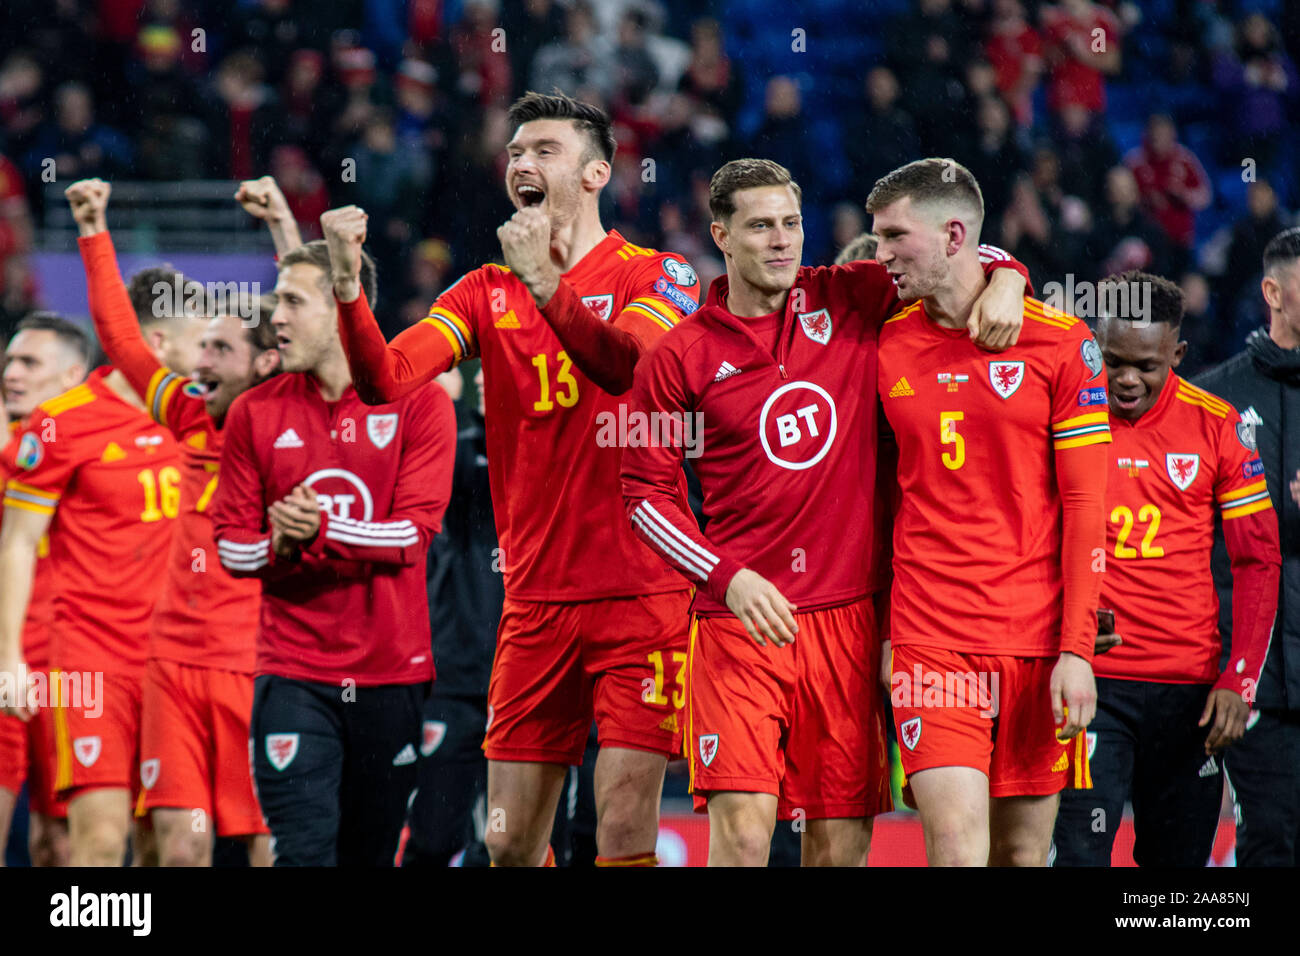 Cardiff, UK. 19th Nov, 2019. Wales players celebrate qualification. UEFA Euro 2020 qualifier group E match, Wales v Hungary at the Cardiff city Stadium in Cardiff, South Wales on Tuesday 19th November 2019. pic by Lewis Mitchell/Andrew Orchard sports photography/Alamy live News EDITORIAL USE ONLY Credit: Andrew Orchard sports photography/Alamy Live News Stock Photo